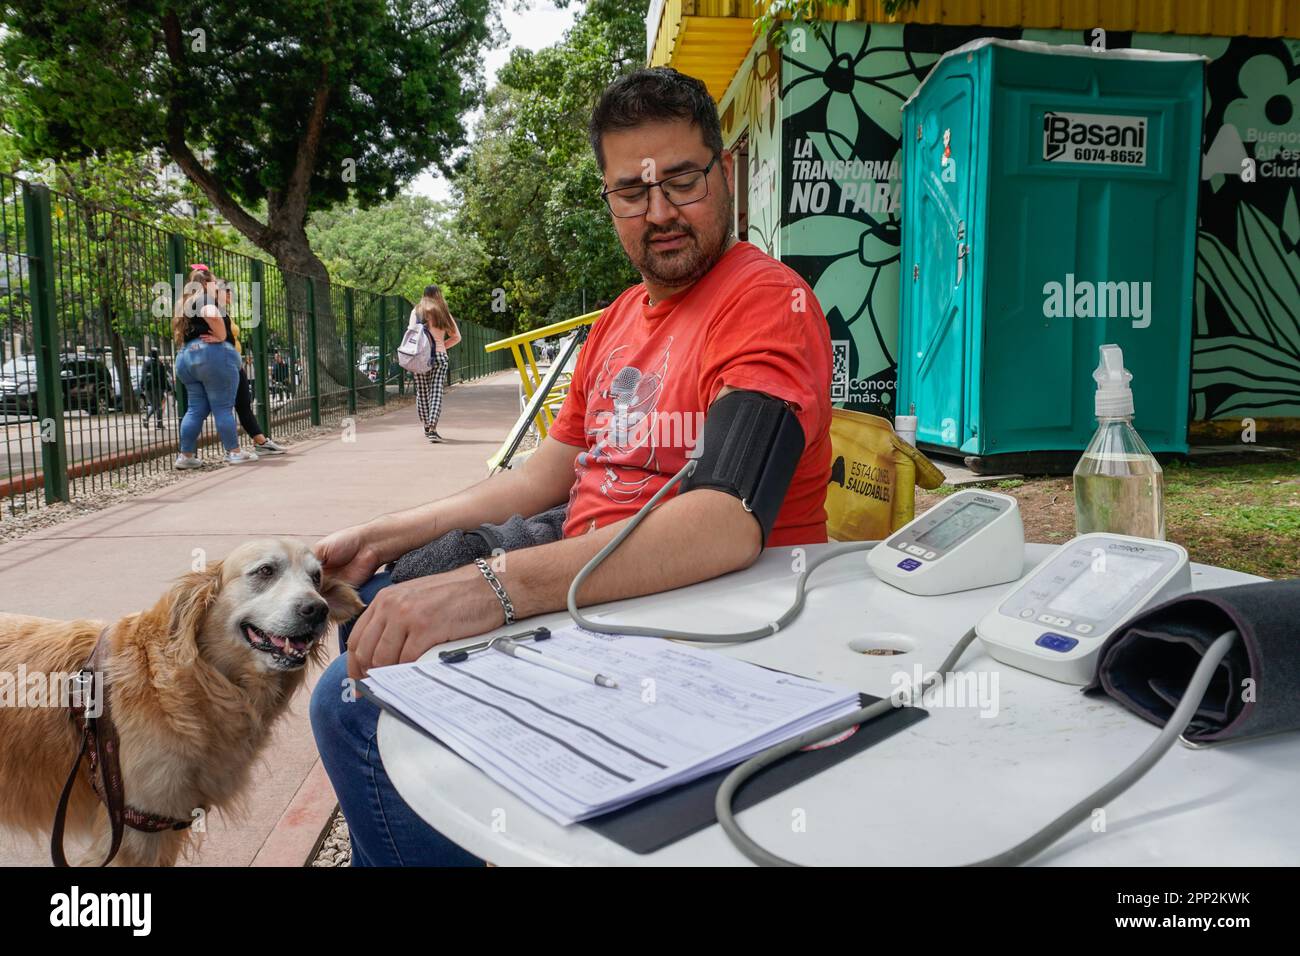 Américo Alvarado waits for a blood pressure result while petting his dog at a health station in Buenos Aires, Argentina on Oct. 19, 2022. Throughout the city, the stations offer free nutritional counseling, nursing services and recreational activities to promote health. (Lucila Pellettieri/Global Press Journal) Stock Photo